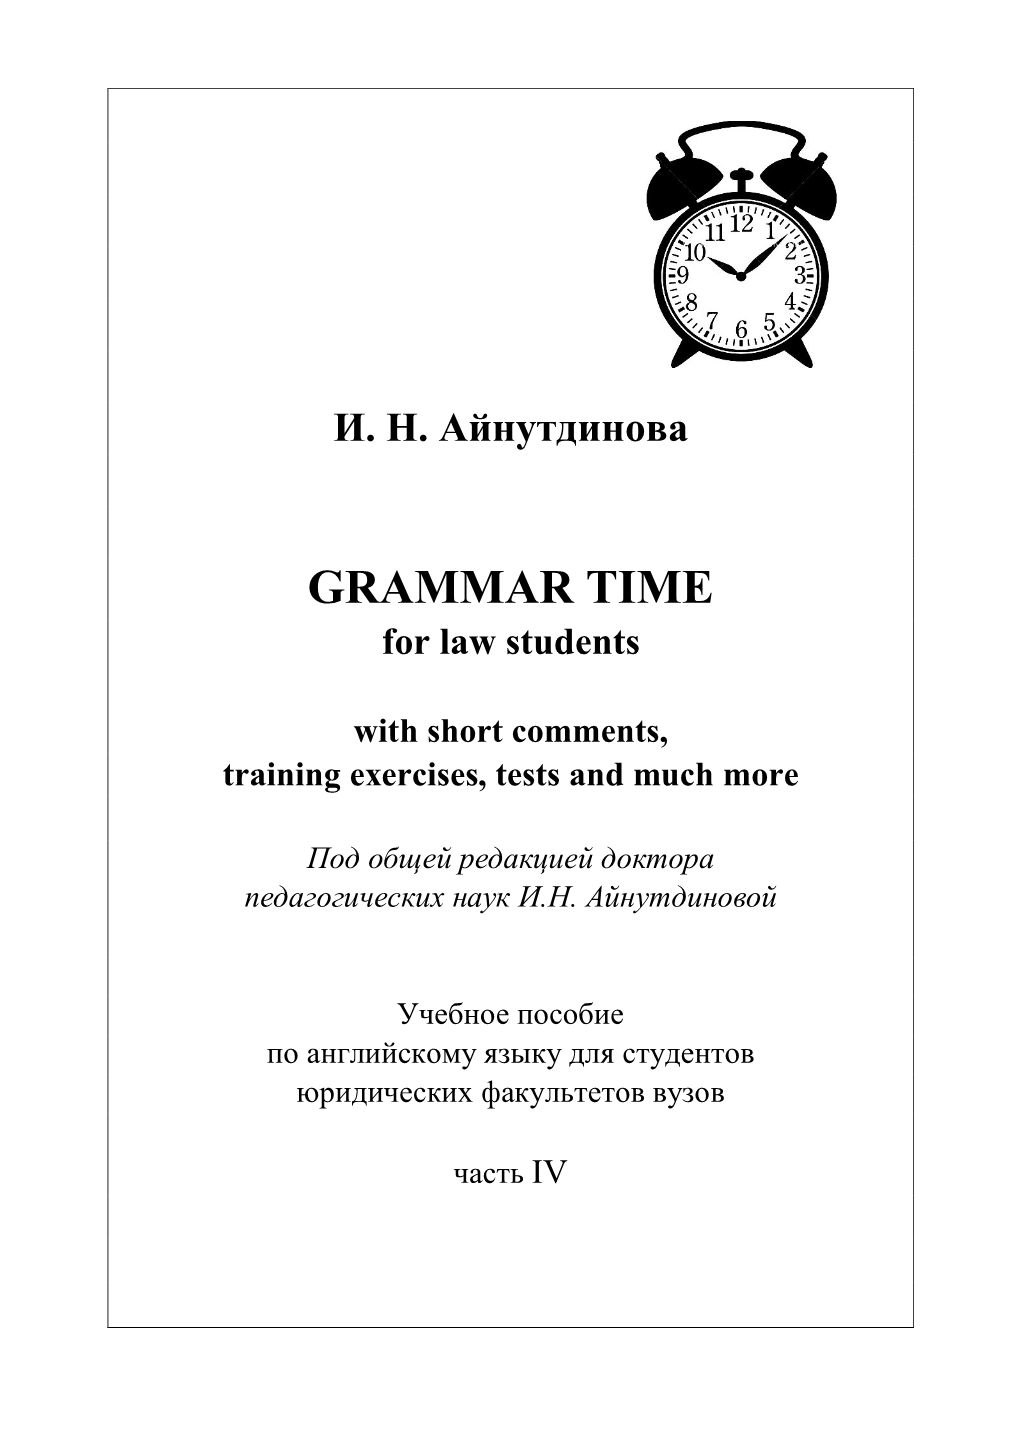 GRAMMAR TIME for Law Students